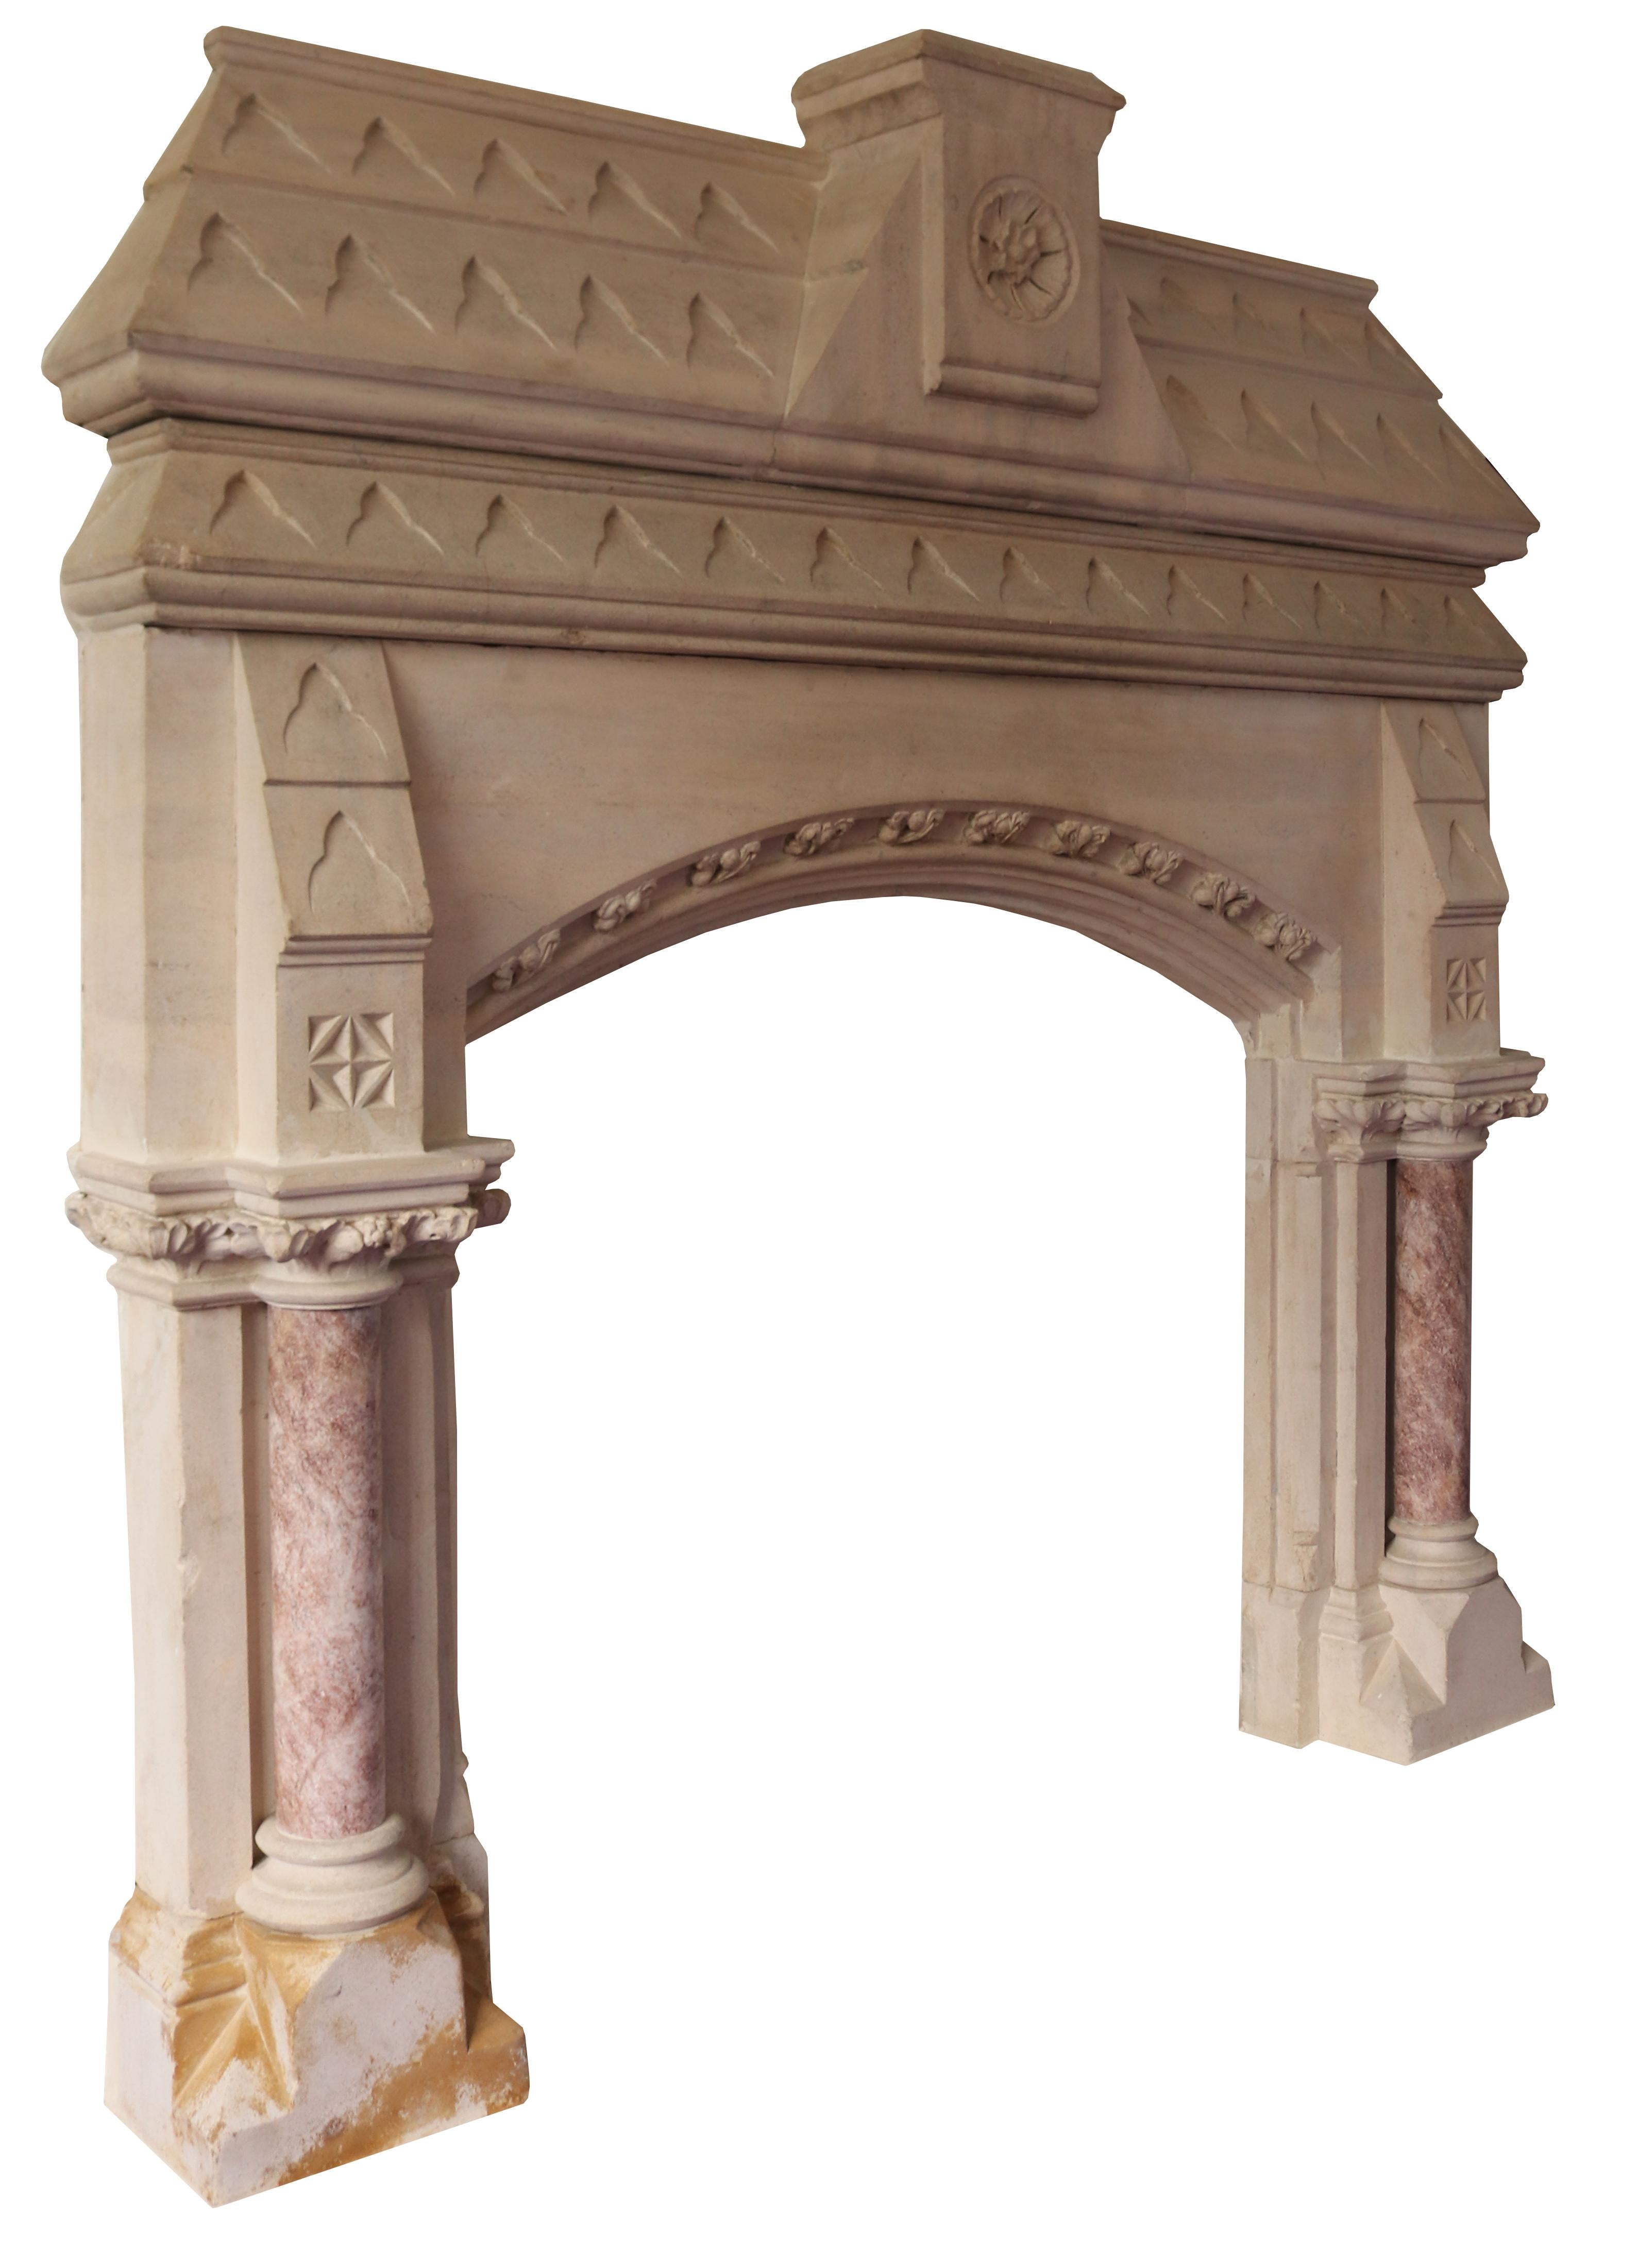 Limestone Gothic Revival Mantel in the Manner of Pugin In Fair Condition For Sale In Wormelow, Herefordshire